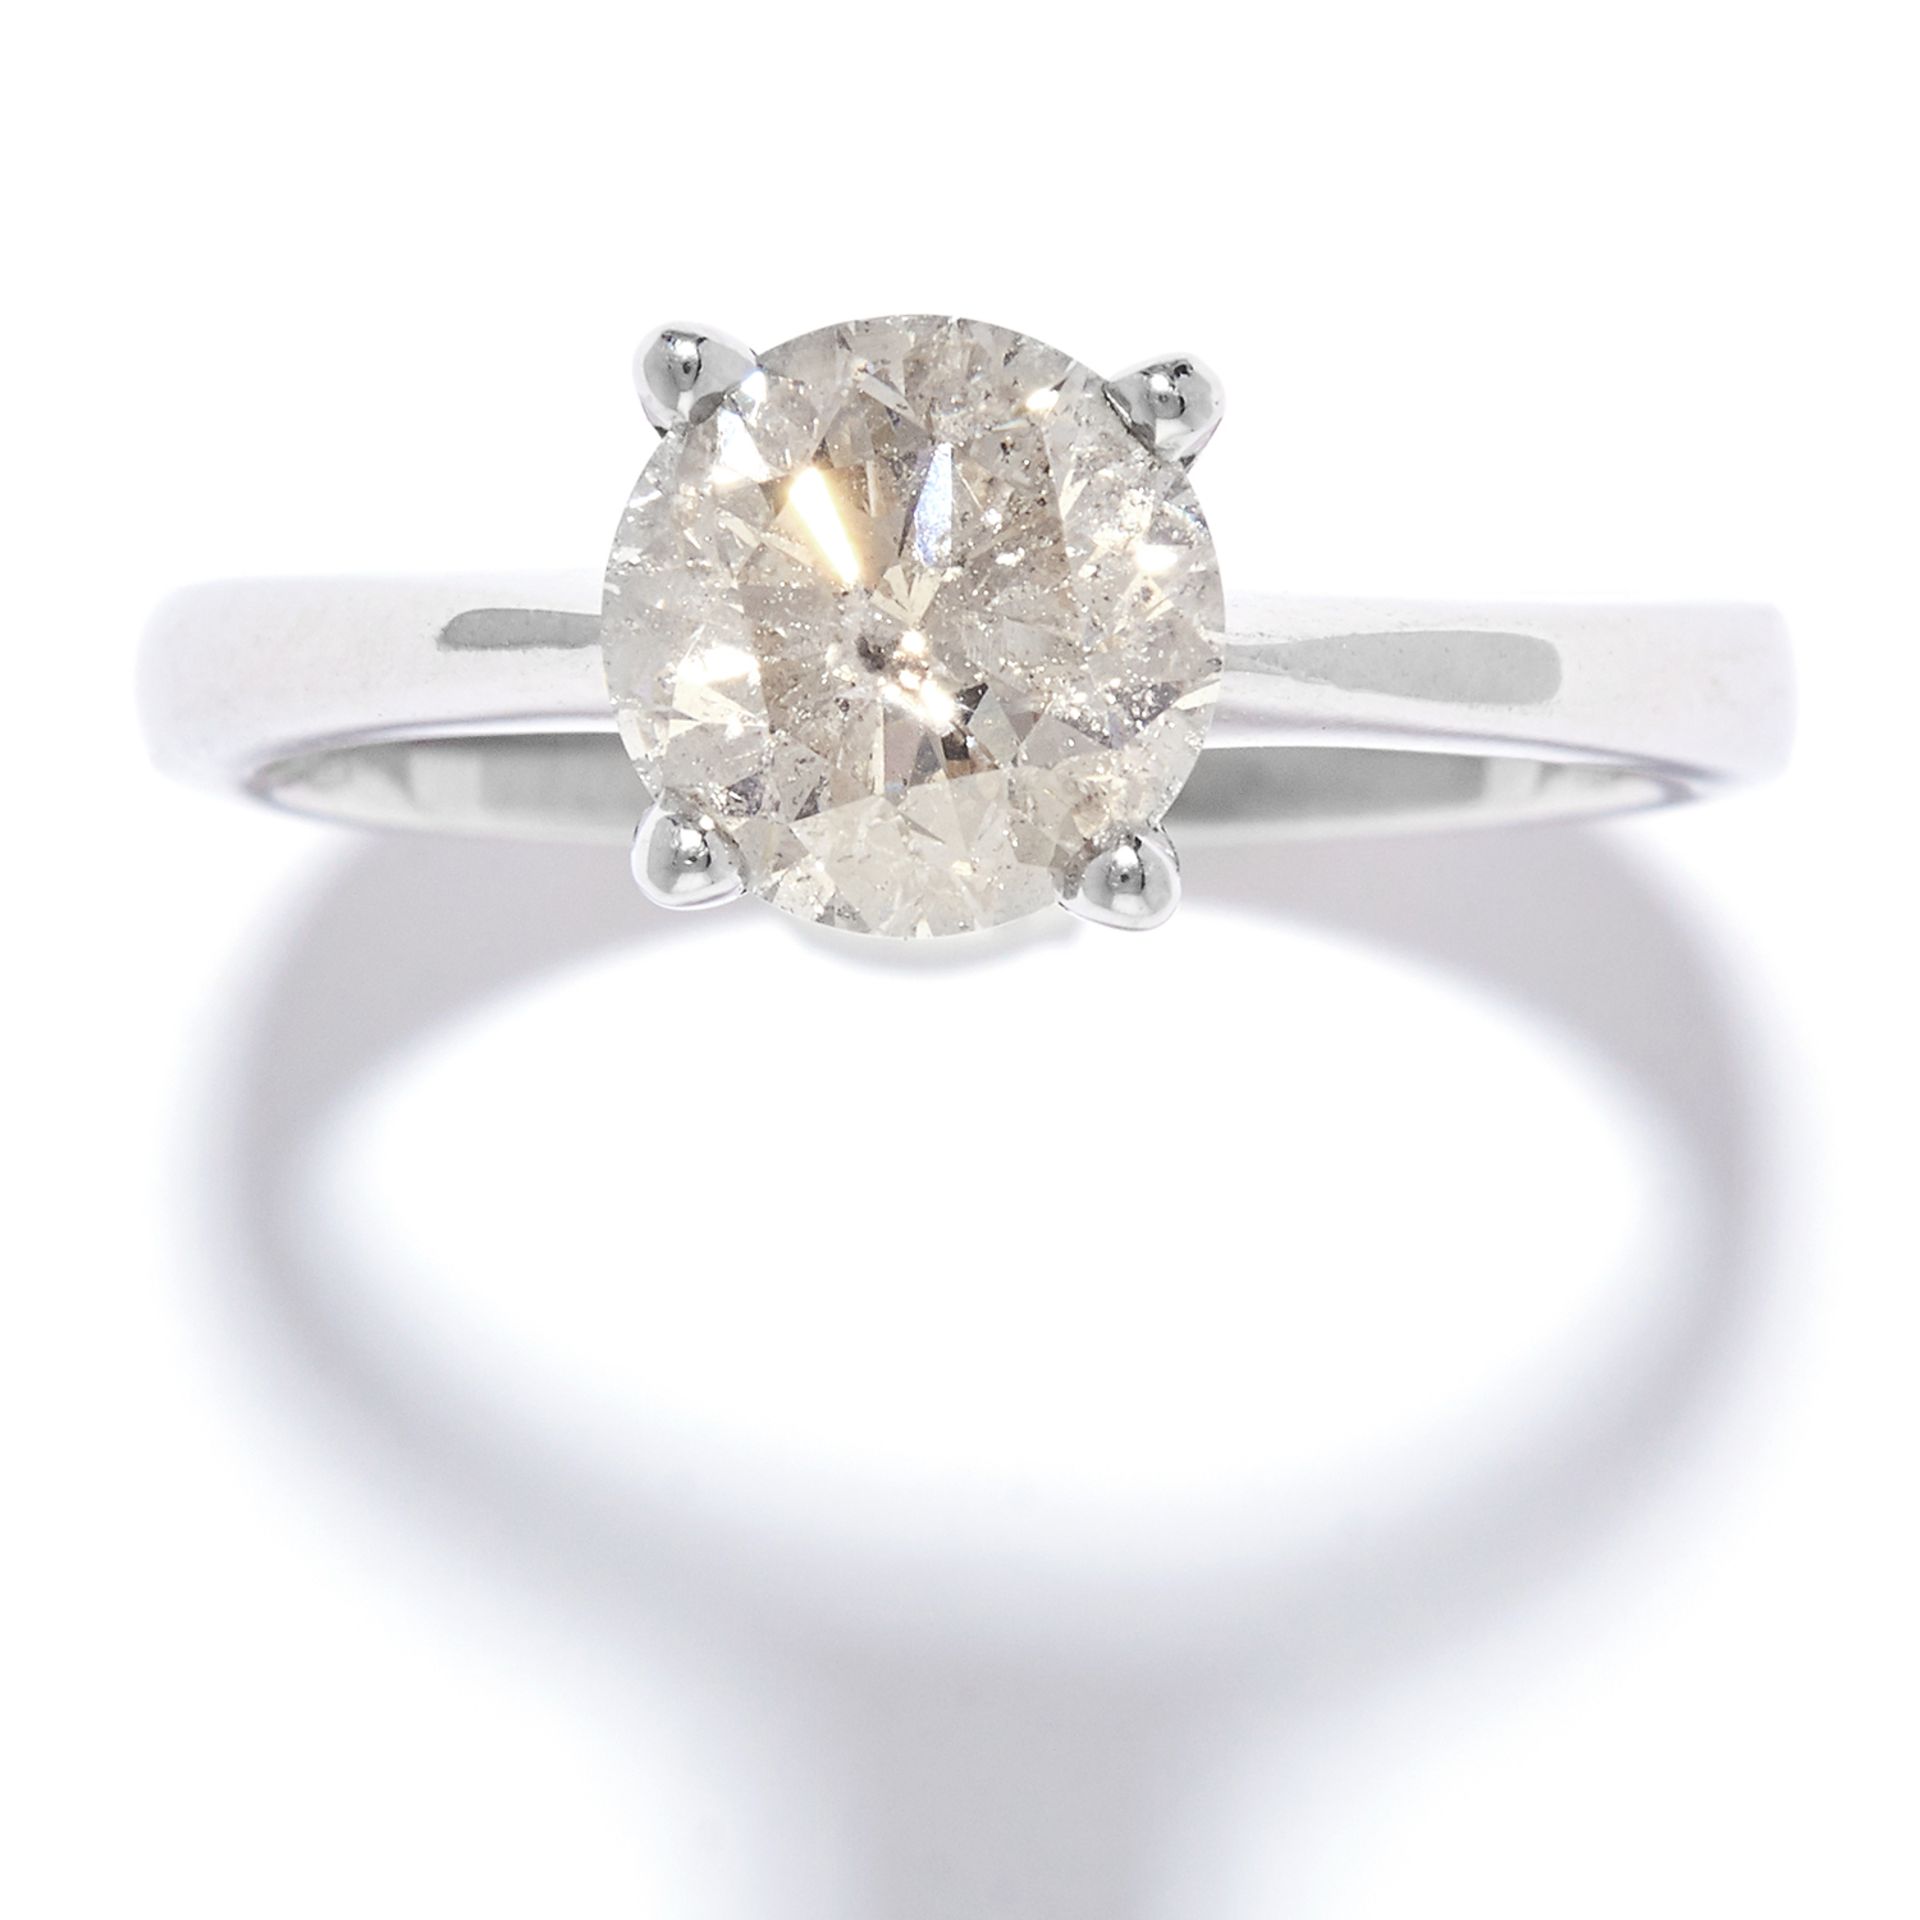 1.53 CARAT SOLITAIRE DIAMOND RING in 18ct white gold, set with a round cut diamond of